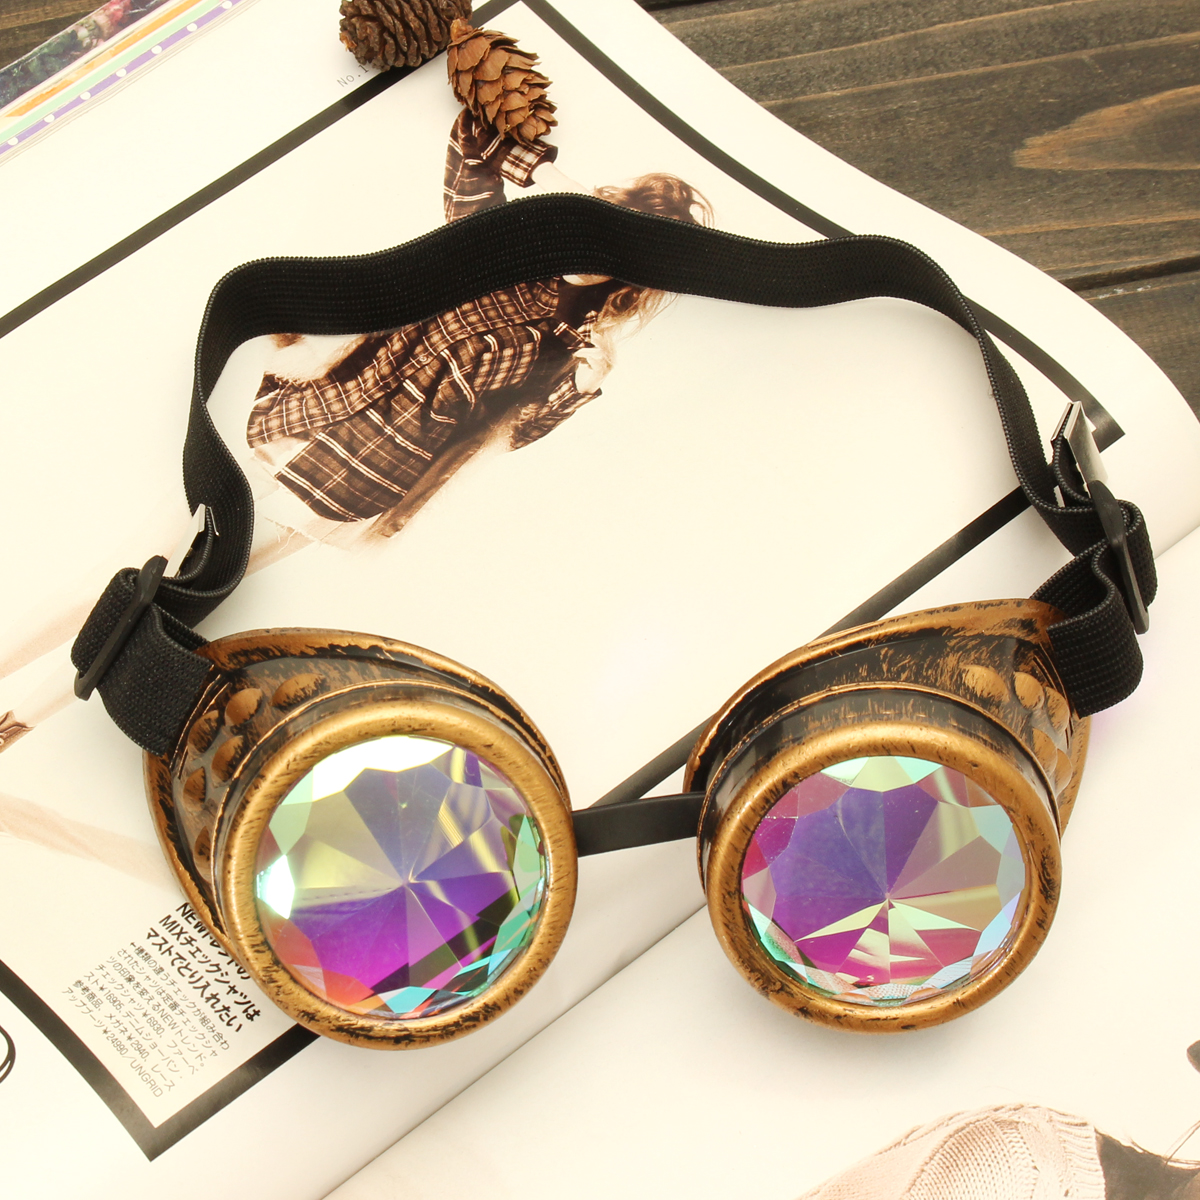 Kaleidoscope-Glasses-Vintage-Style-Windproof-Outdoor-Sunglasses-Gold-Siver-Copper-1209770